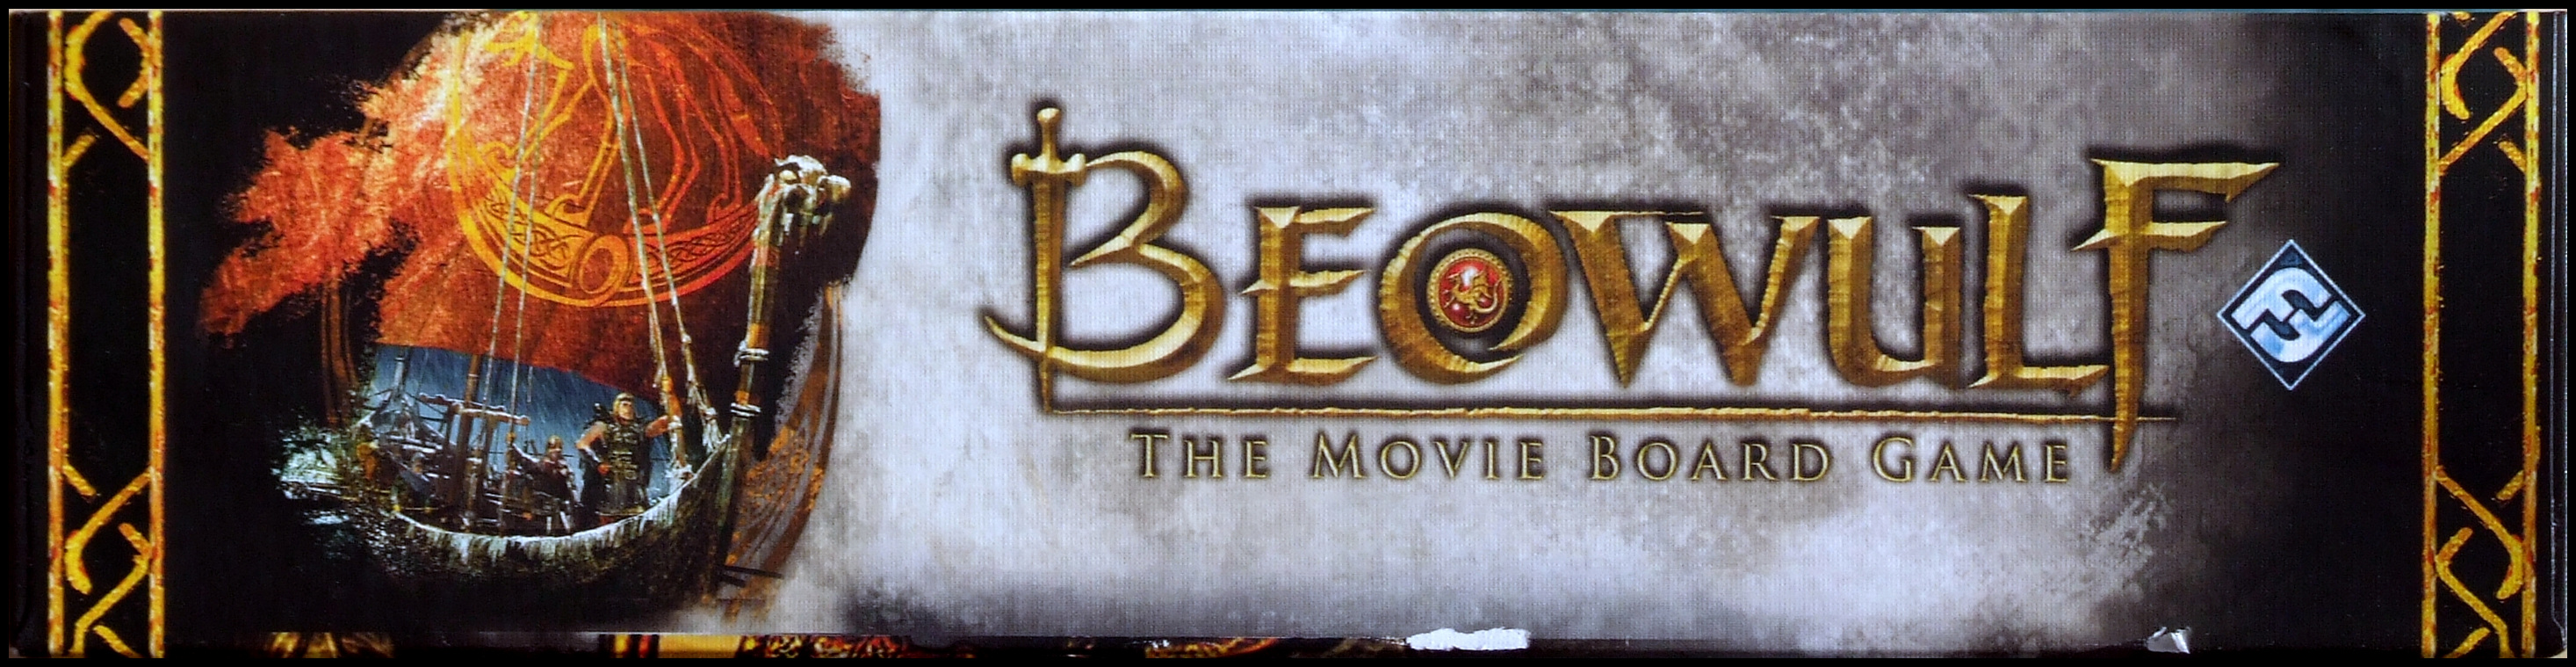 Beowulf: The Movie Board Game - Box Side 1